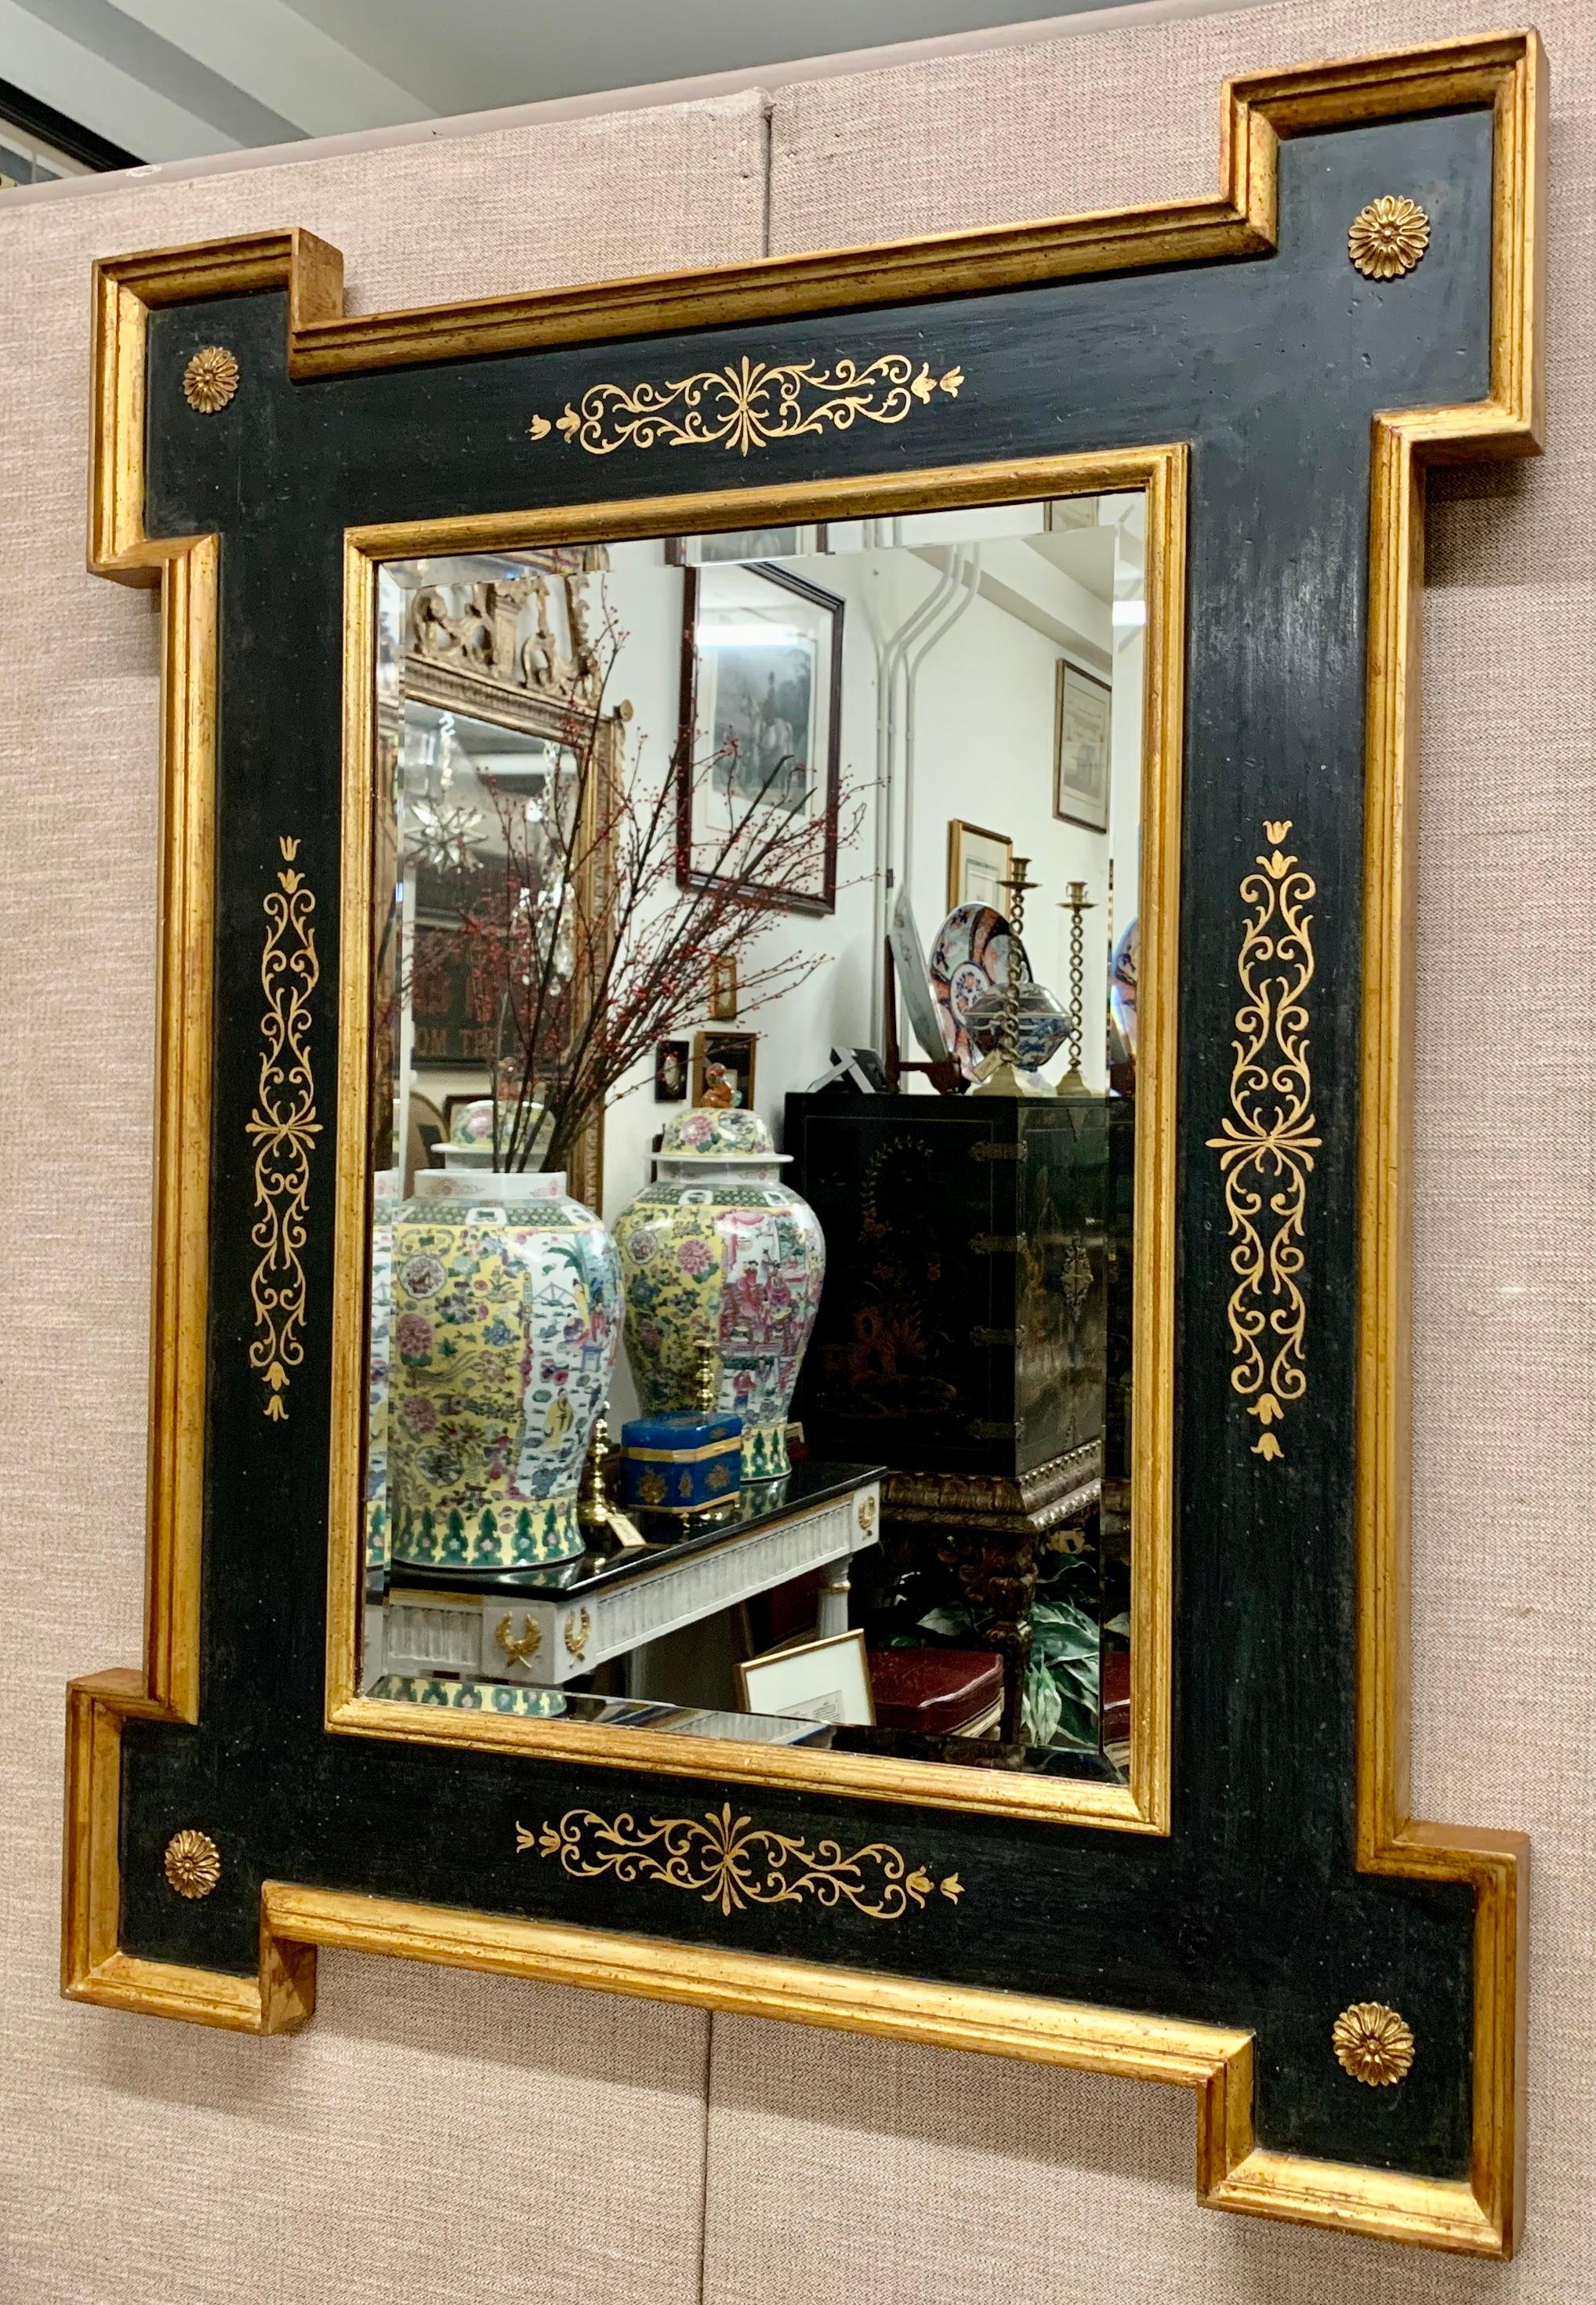 Vintage Italian mirror in black with extended corners and gilt borders. The flat plateau of the mirror has hand painted scrolled designs on all four sides. Each of the extended corners has a centered carved and gilt marguerite flower. The mirror is